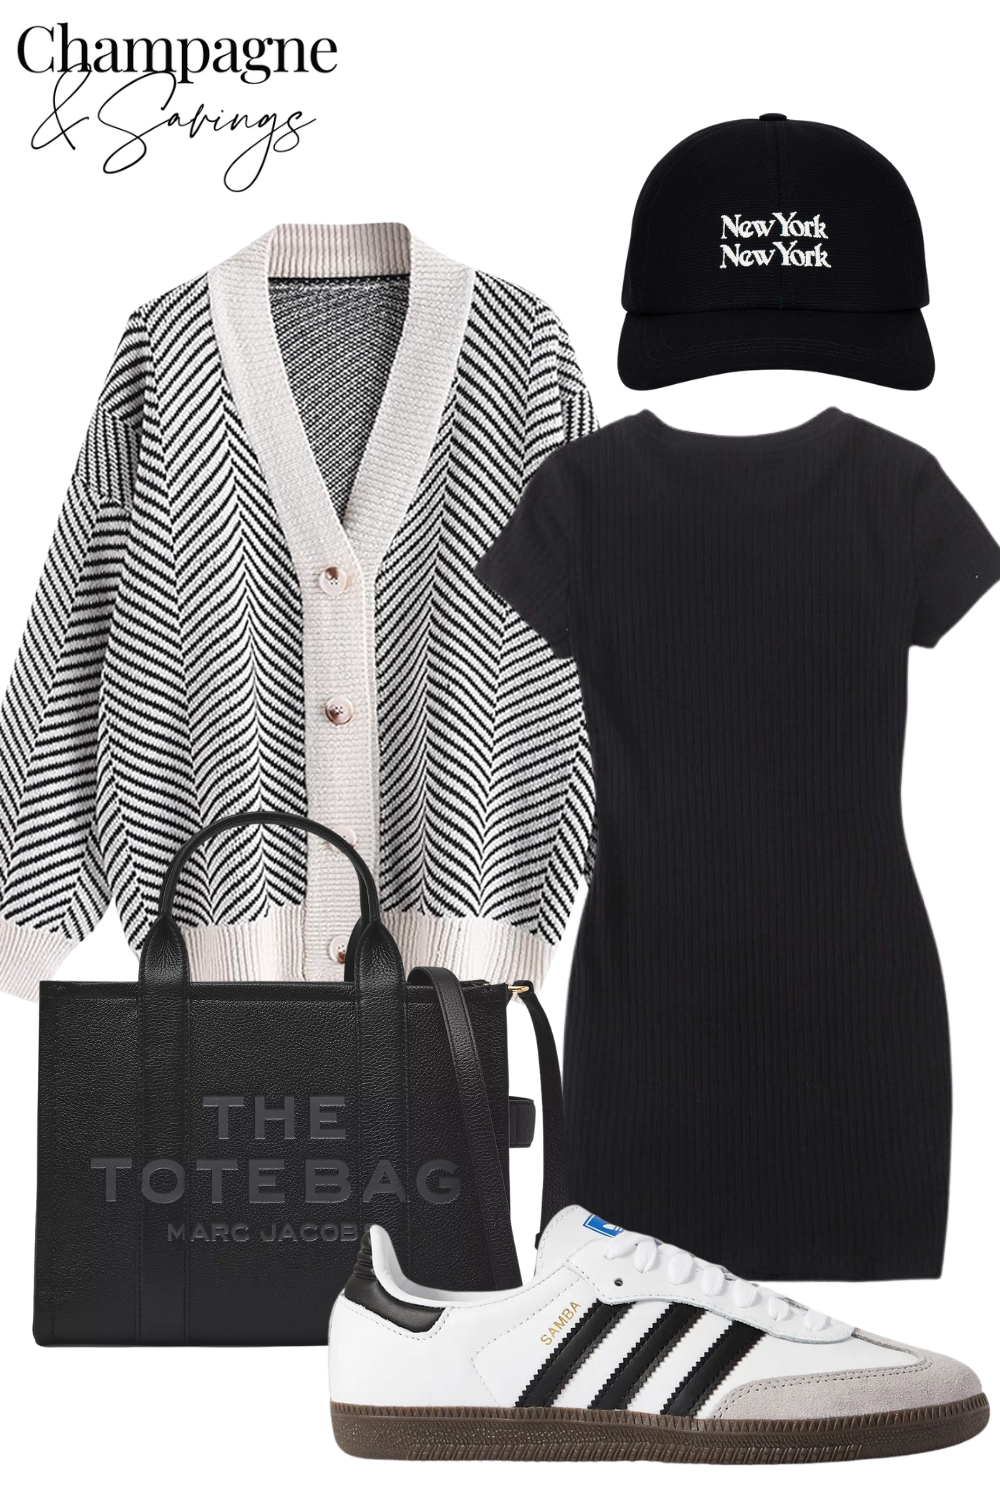 product collage with black and white striped cardigan, black baseball cap that says New York New York on it, black tshirt dress, black tote bag, and Adidas sneakers